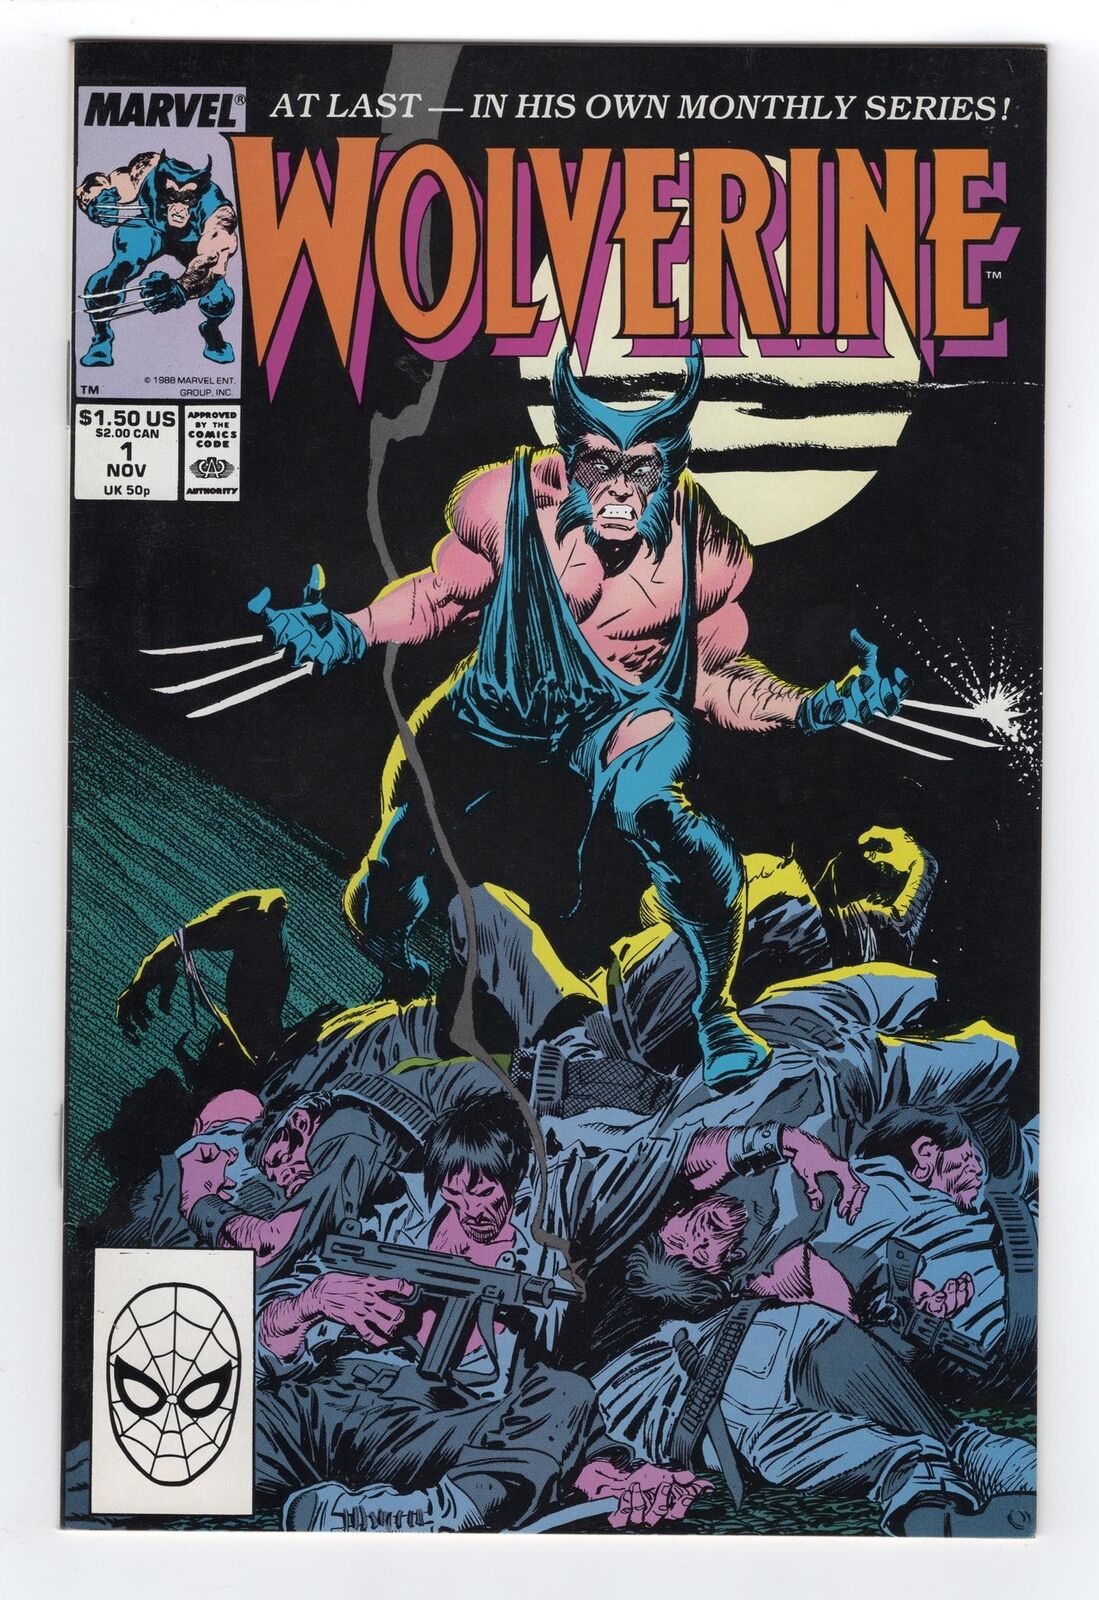 1988 MARVEL WOLVERINE #1 1ST APPEARANCE WOLVERINE AS PATCH KEY RARE HIGH GRADE